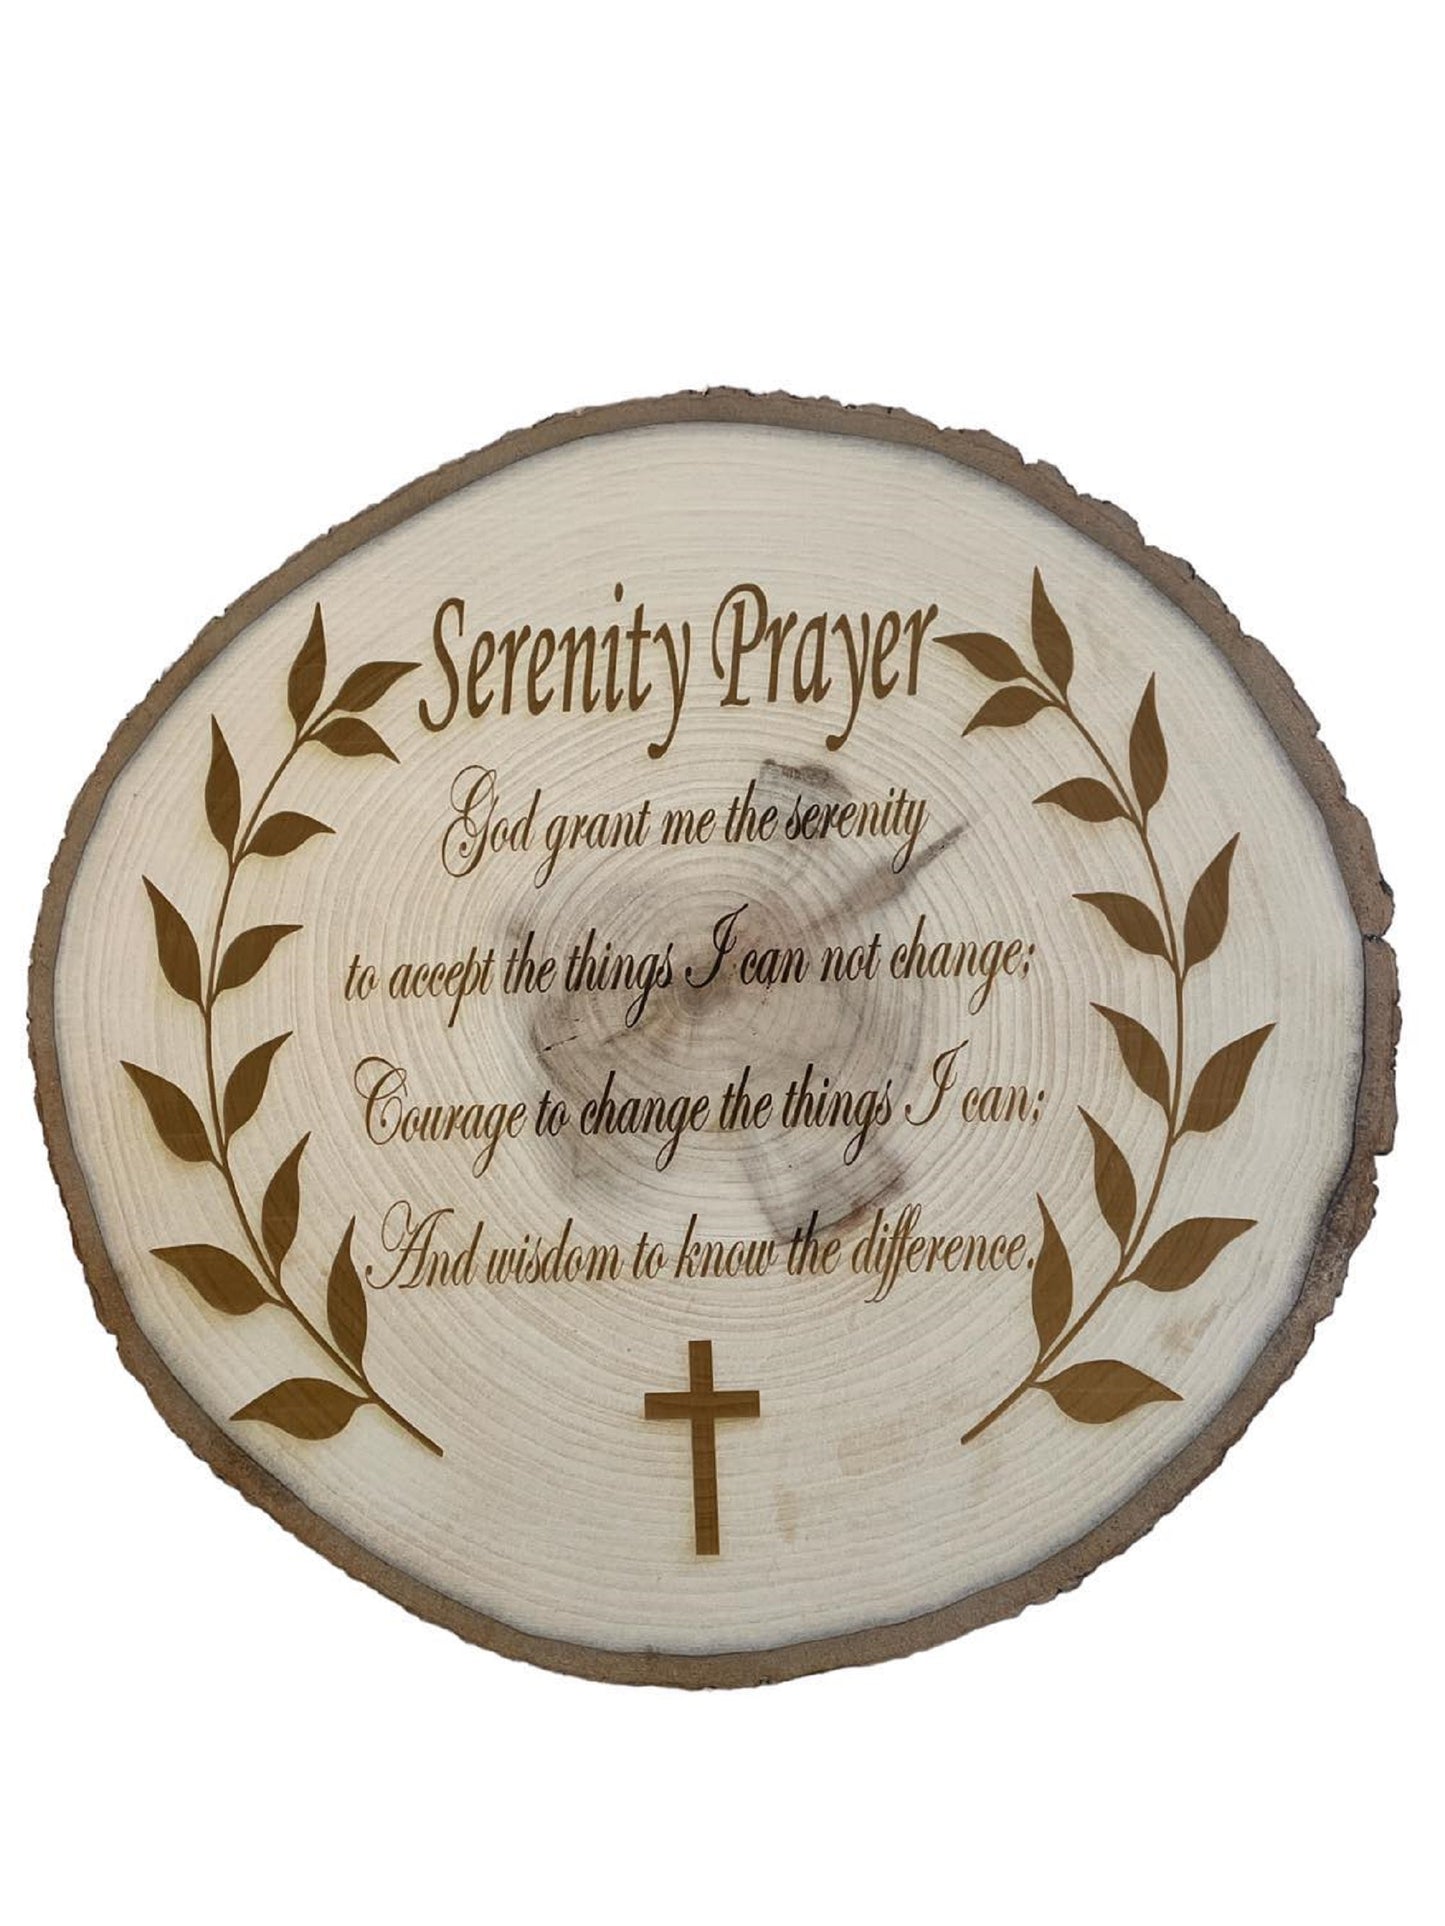 Serenity Prayer Engraved on a beautiful Wood Slice 9"-11" diameter x 1" Thick with Wall Hanger